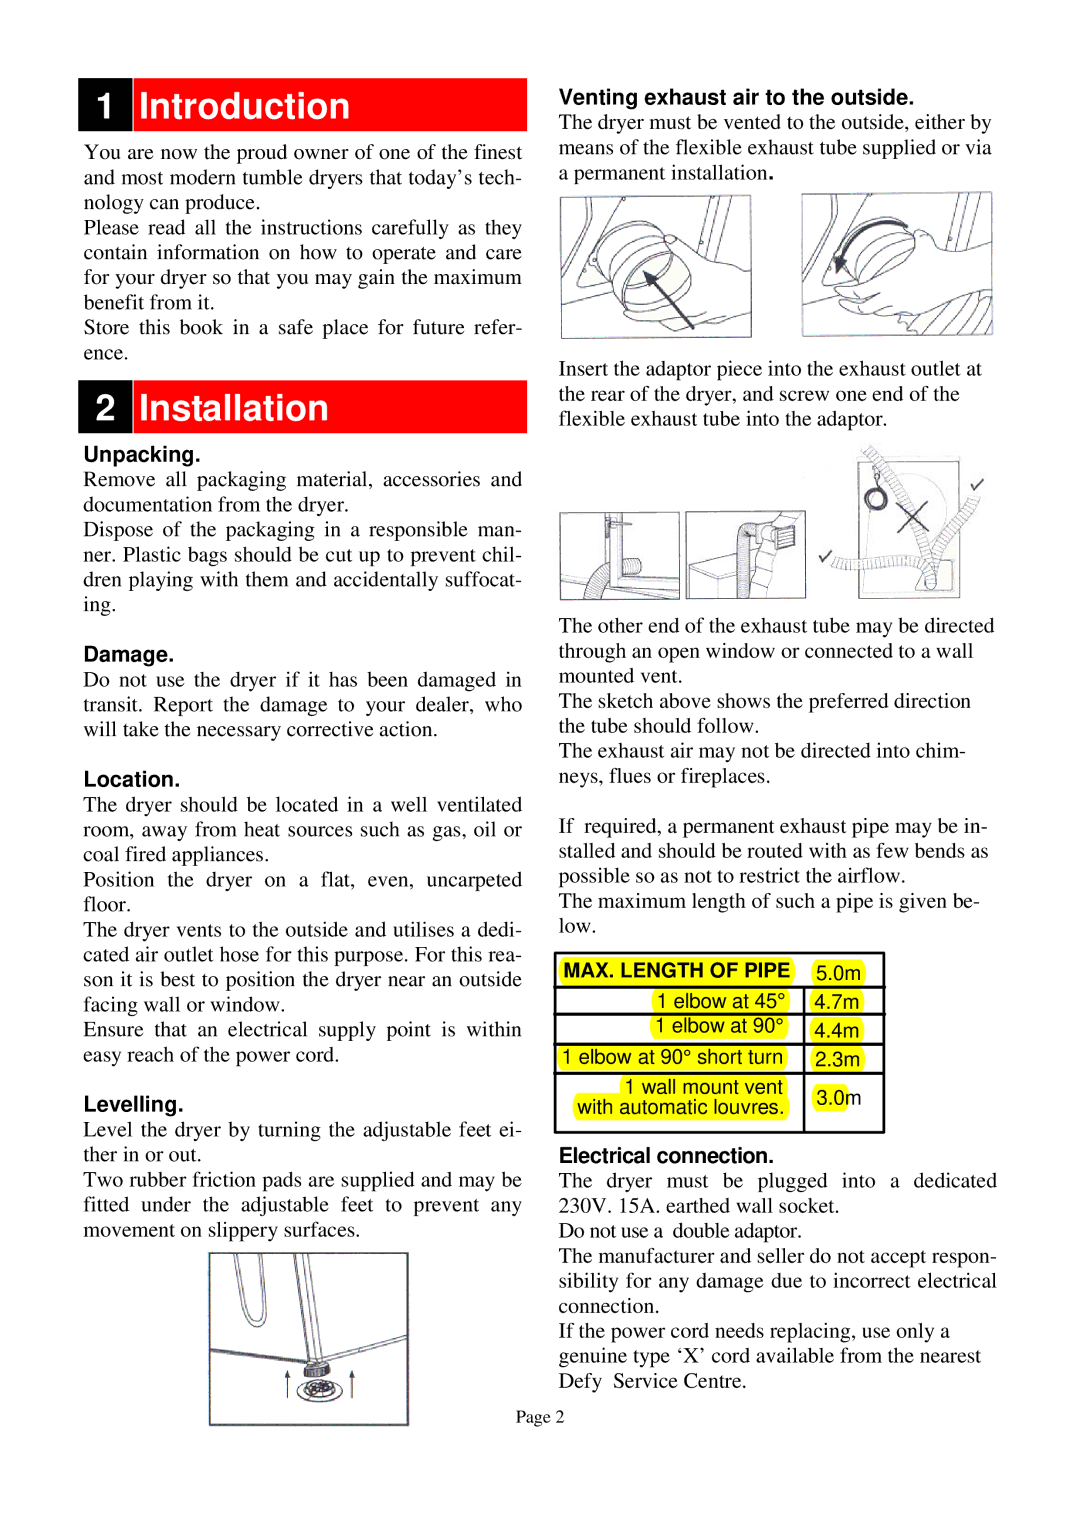 Defy Appliances 600 owner manual Introduction, Installation 